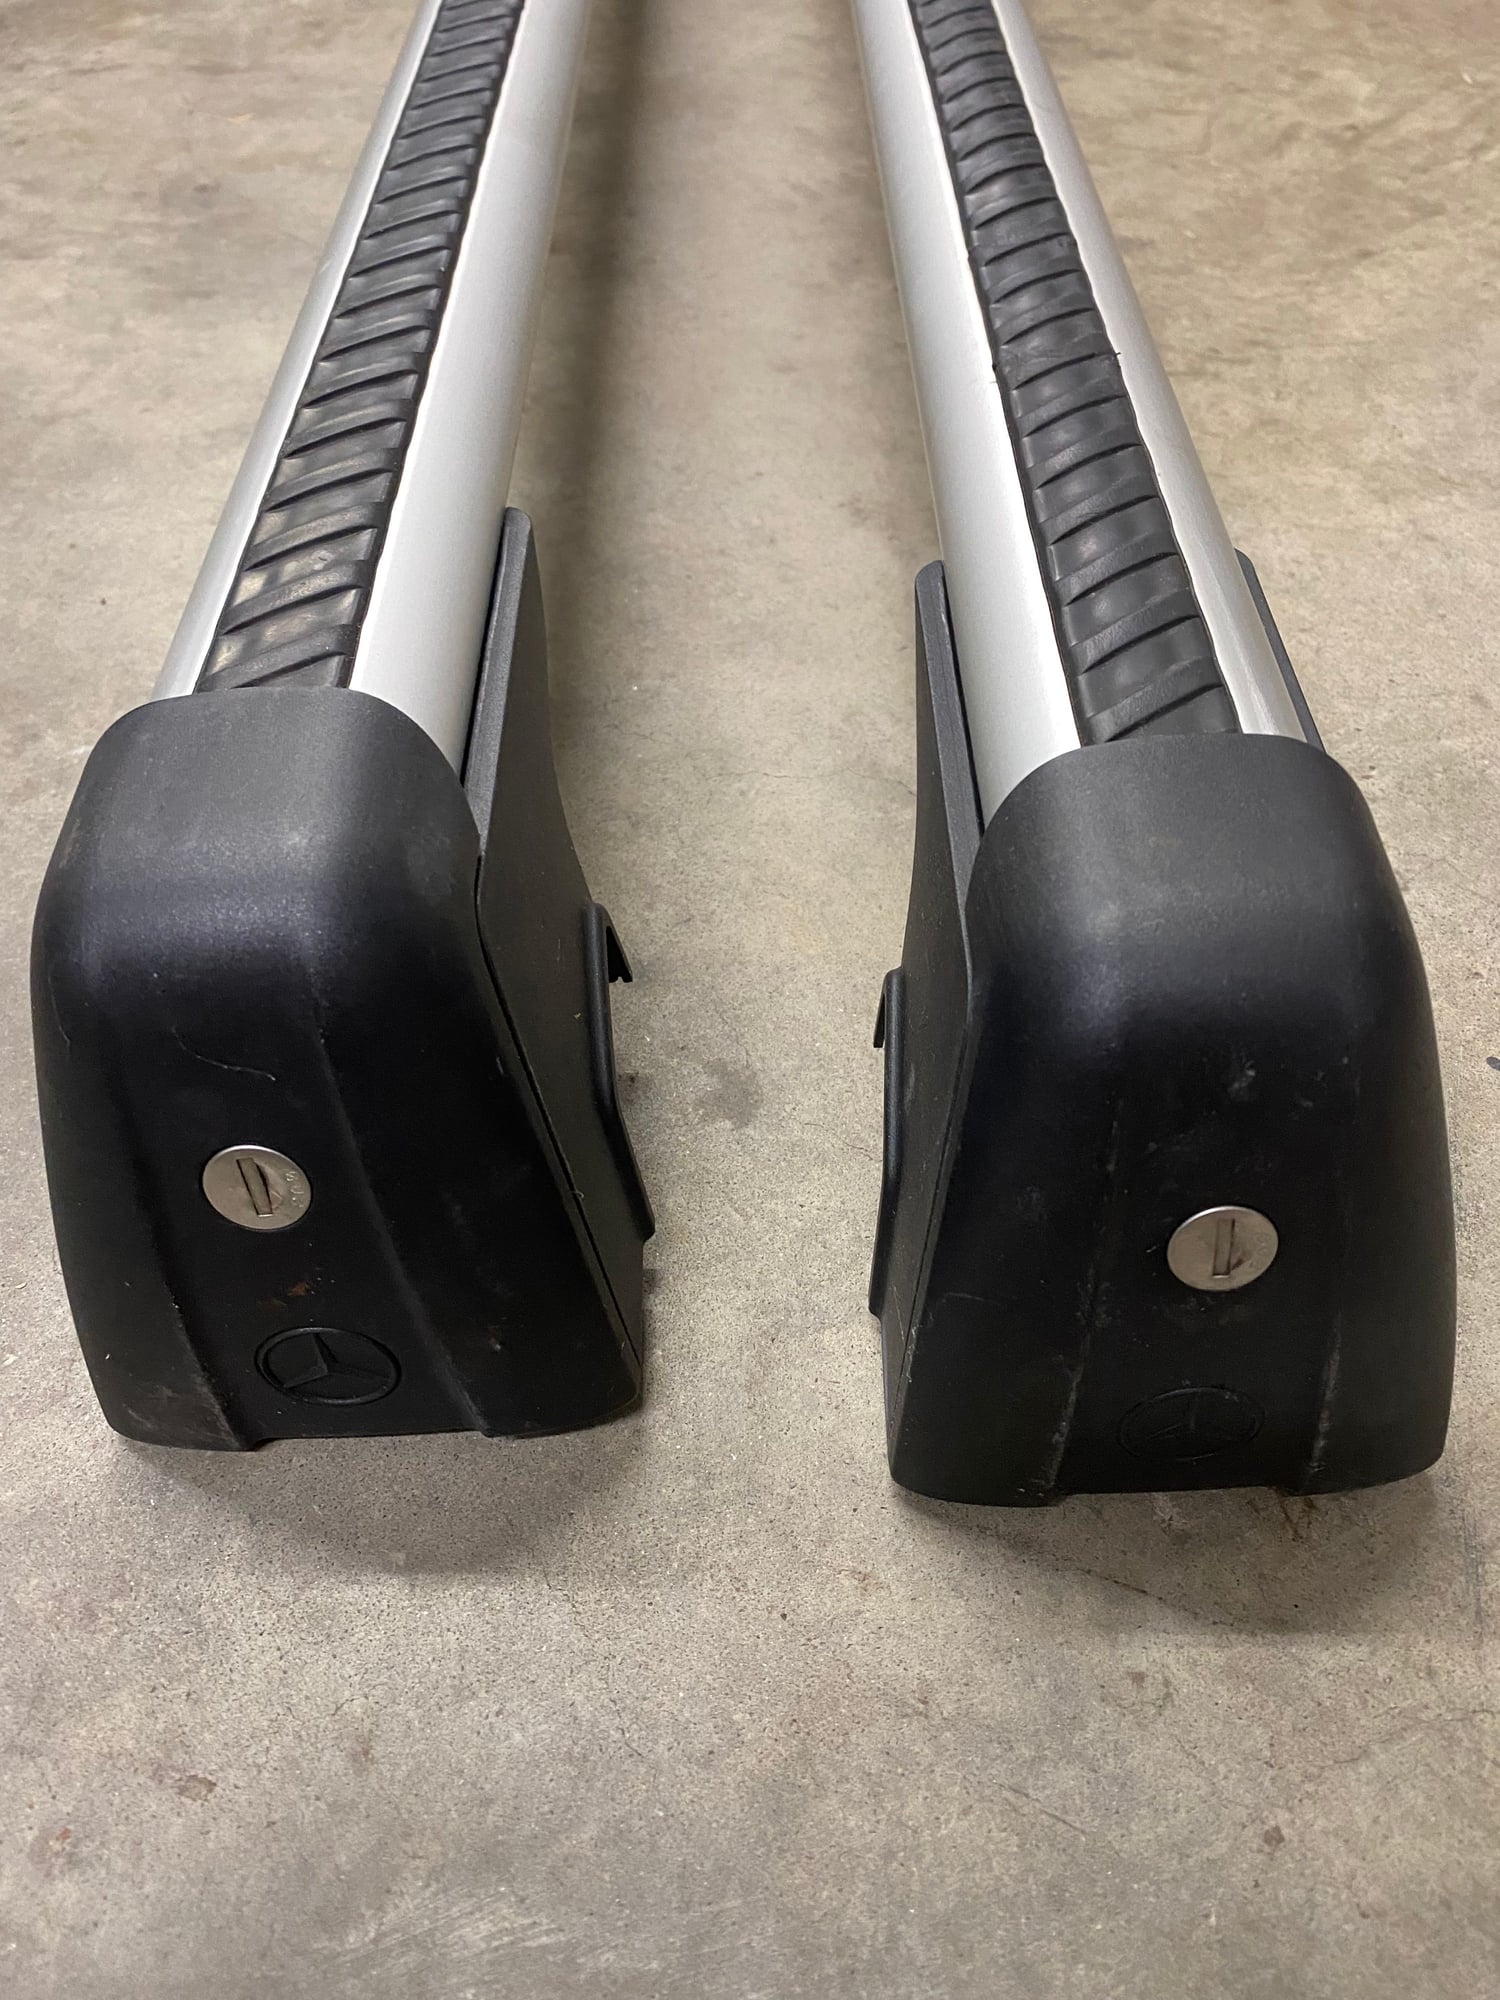 Accessories - X166 OEM Roof Rack with Key - New - 2015 to 2018 Mercedes-Benz GL550 - Lake Wylie, SC 29710, United States